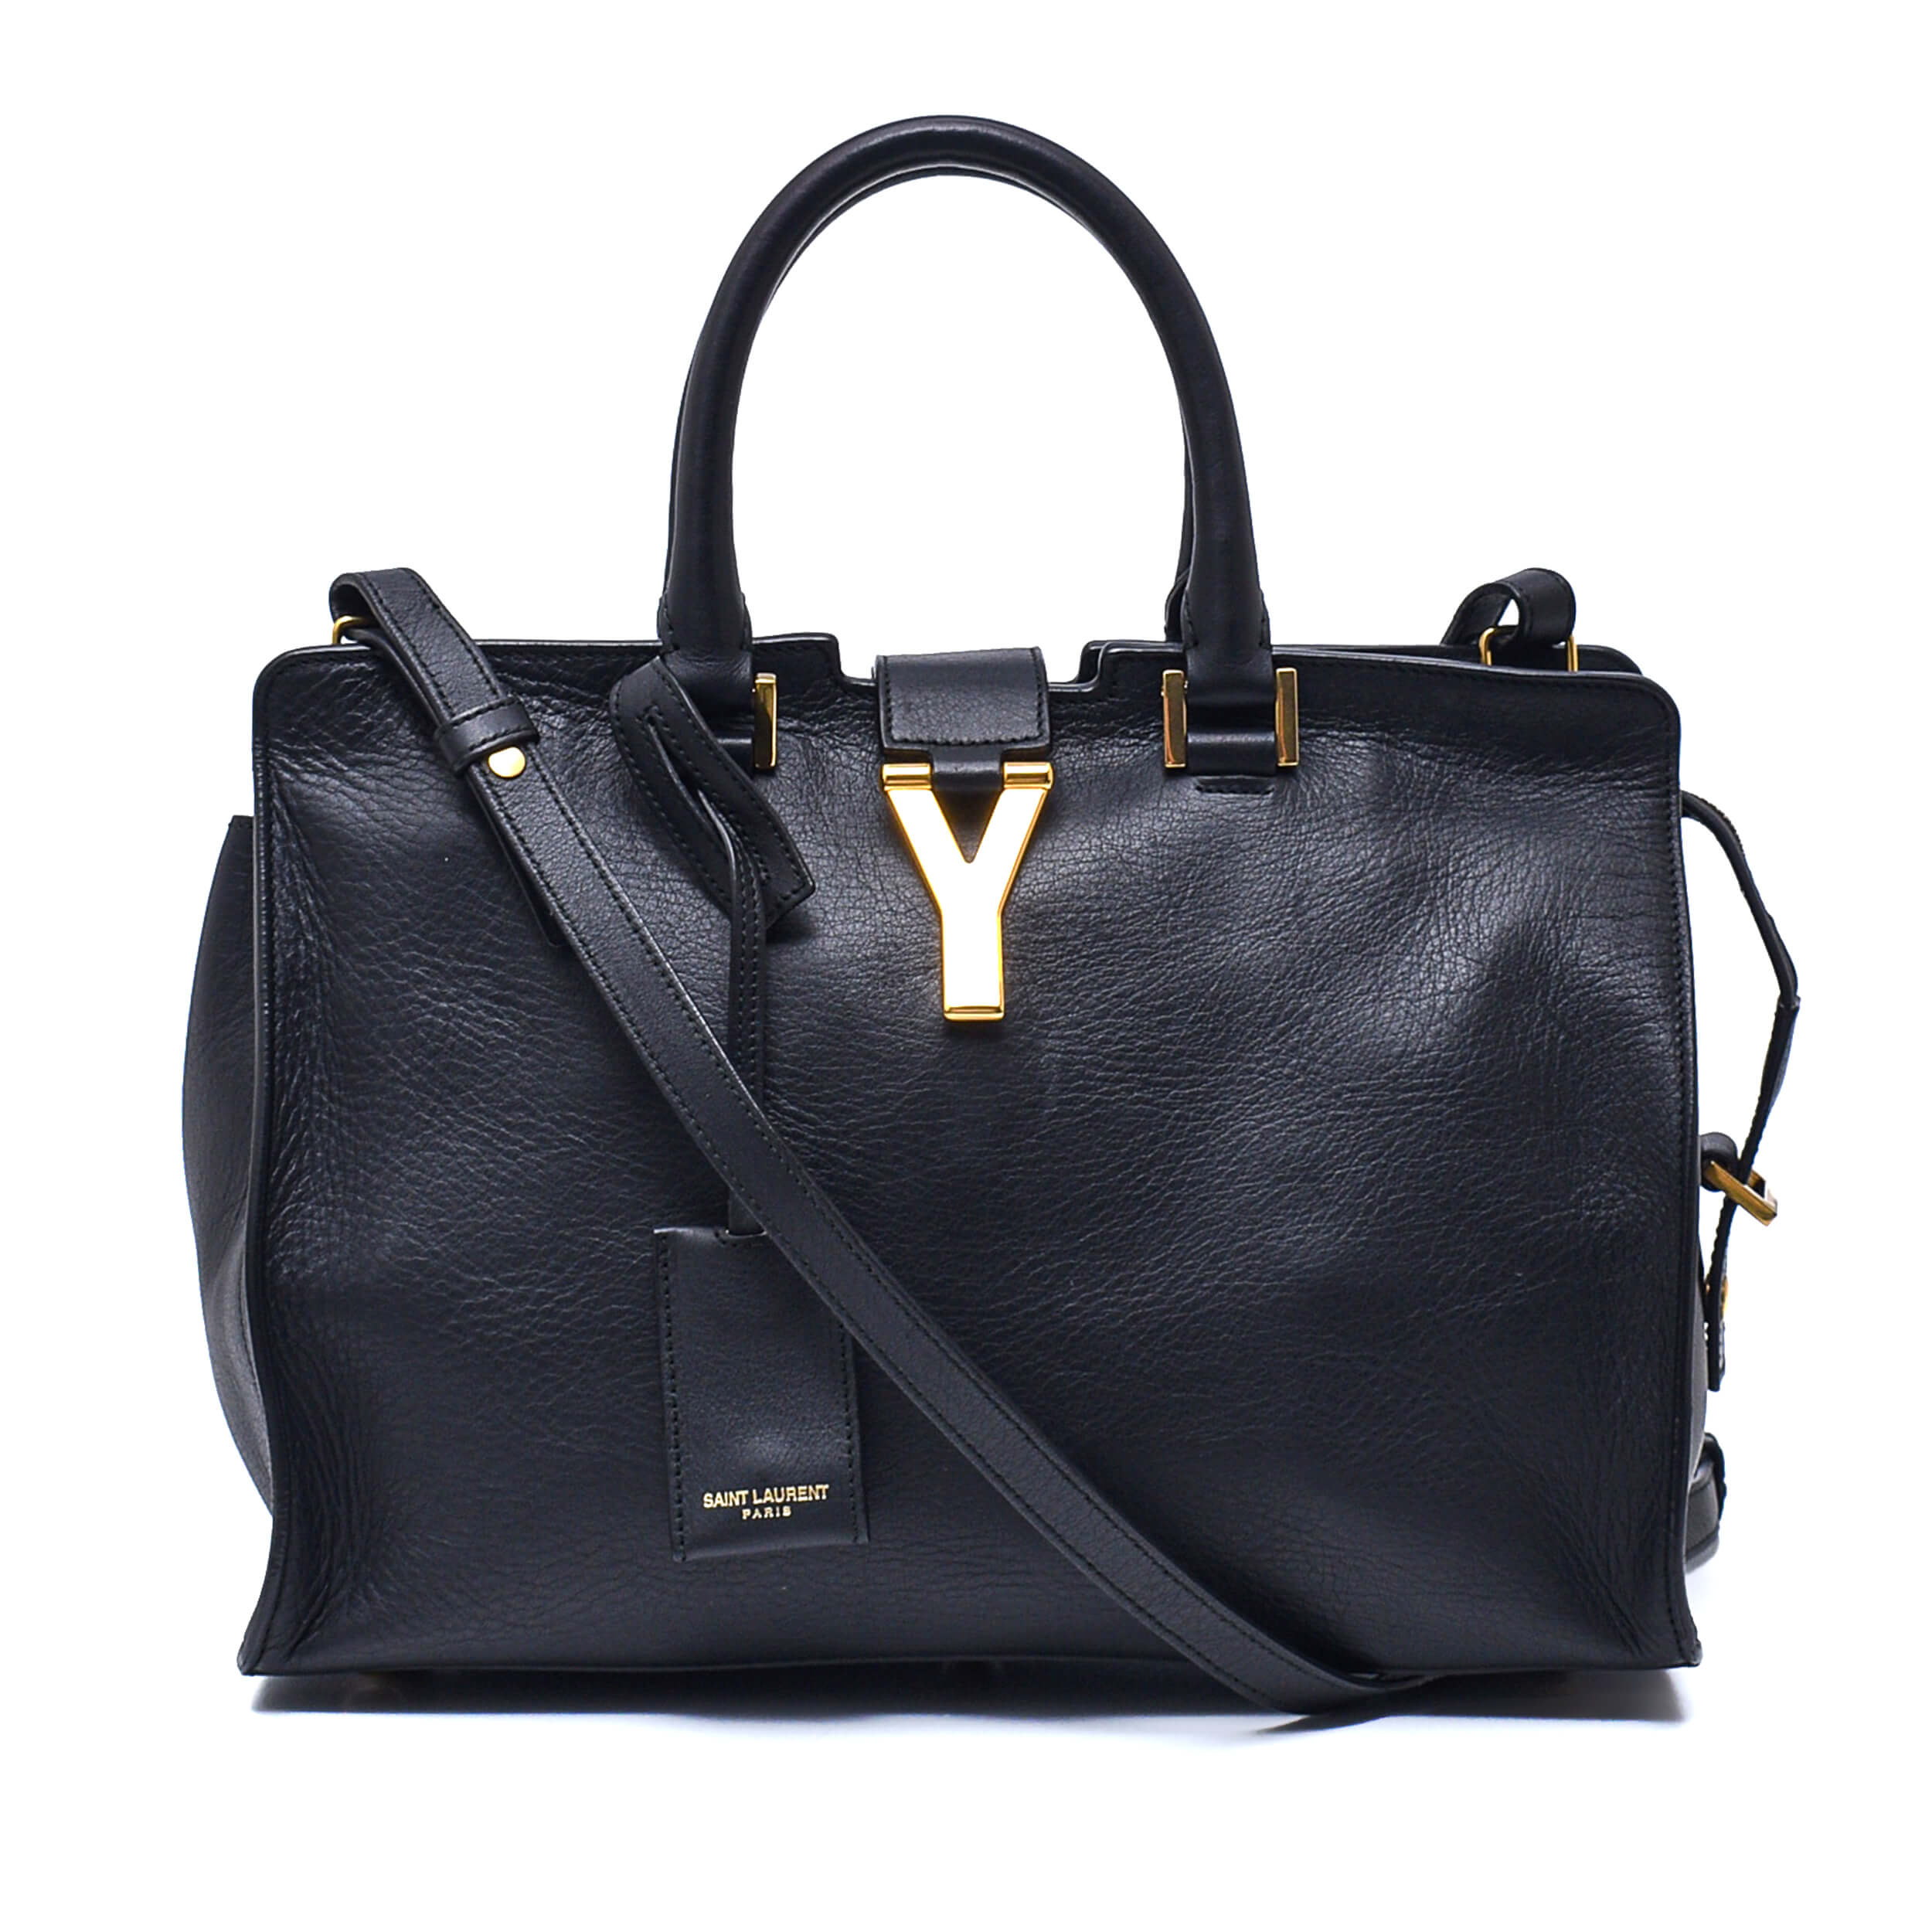 Yves Saint Laurent - Black Leather Cabas Chyc Small Bag